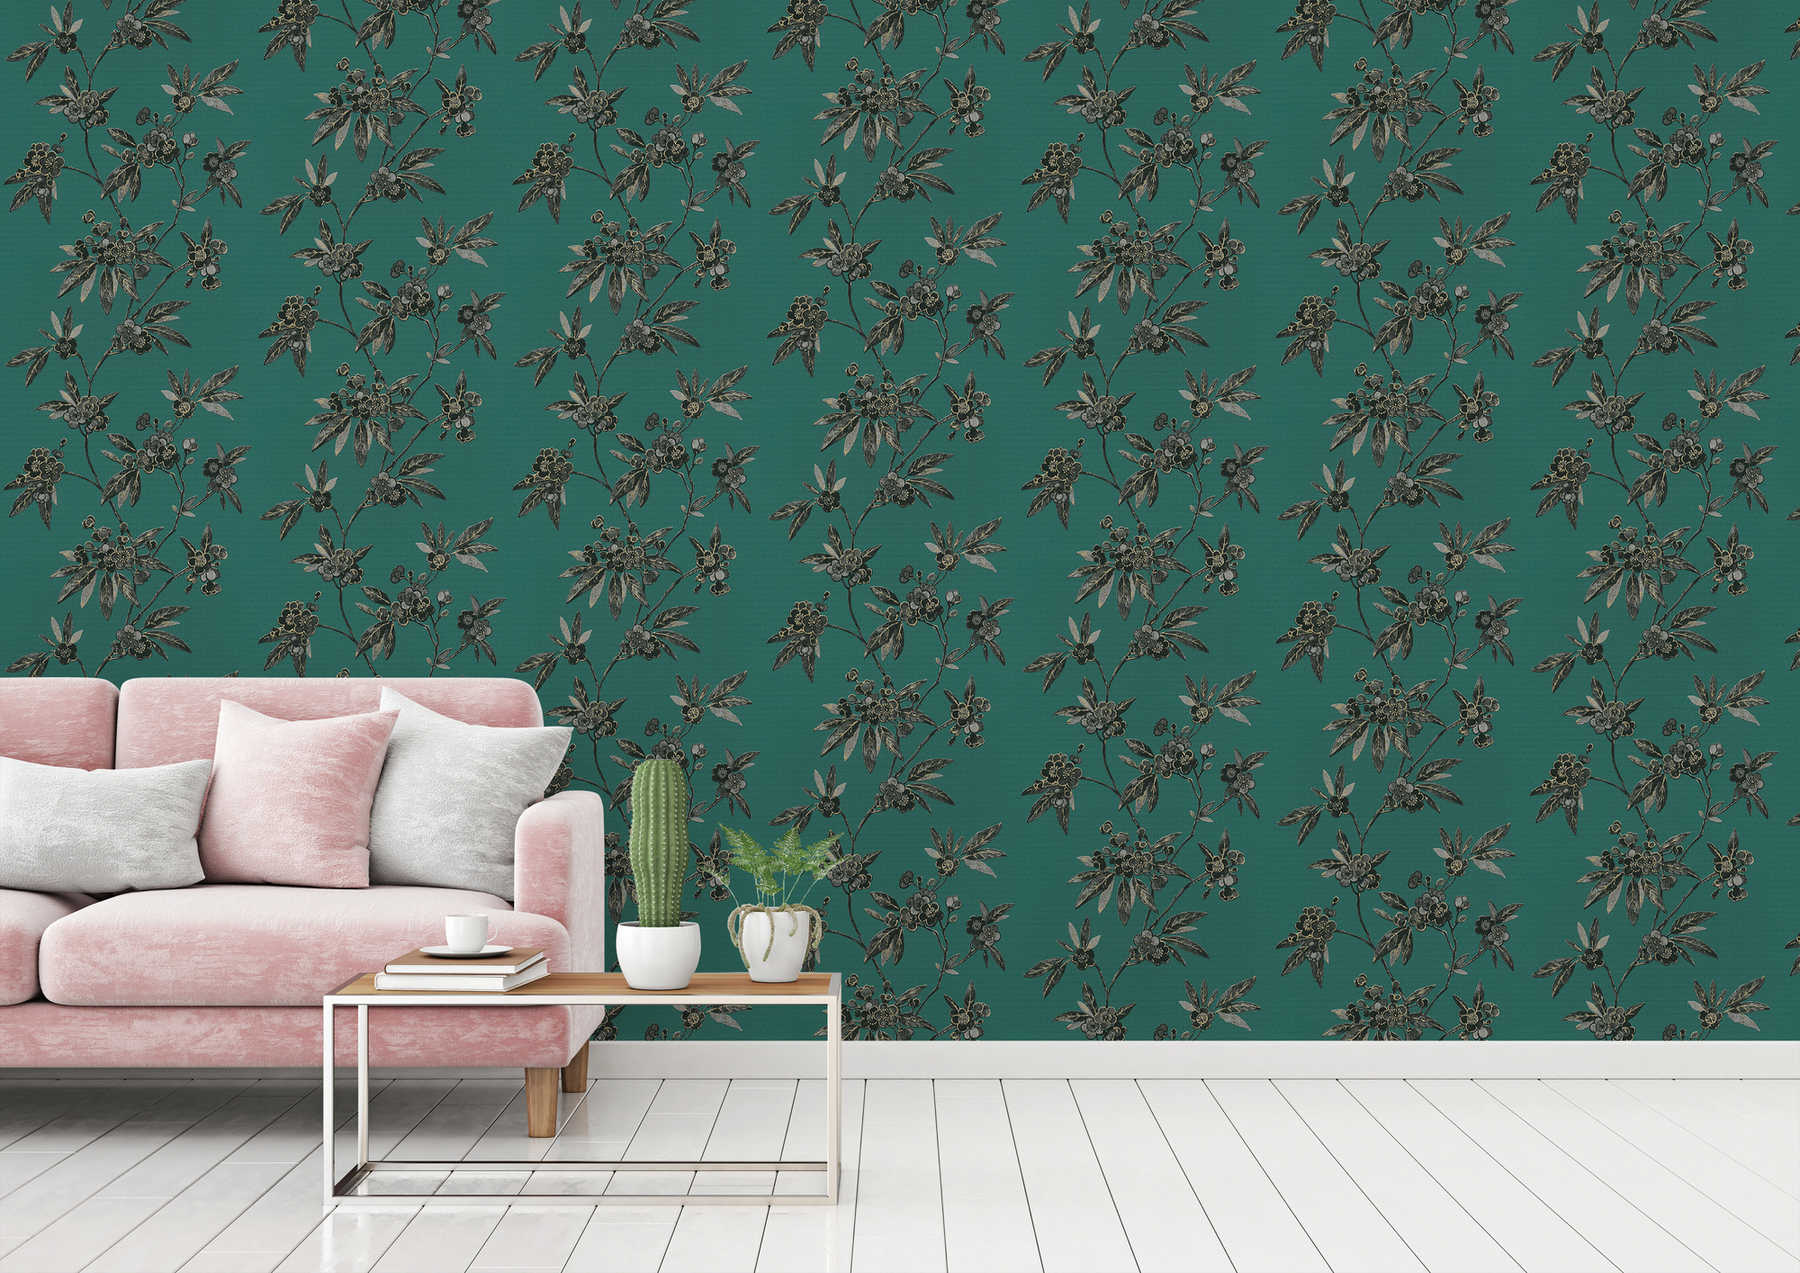             Floral wallpaper with flower tendrils in Asian style - green, black, grey
        